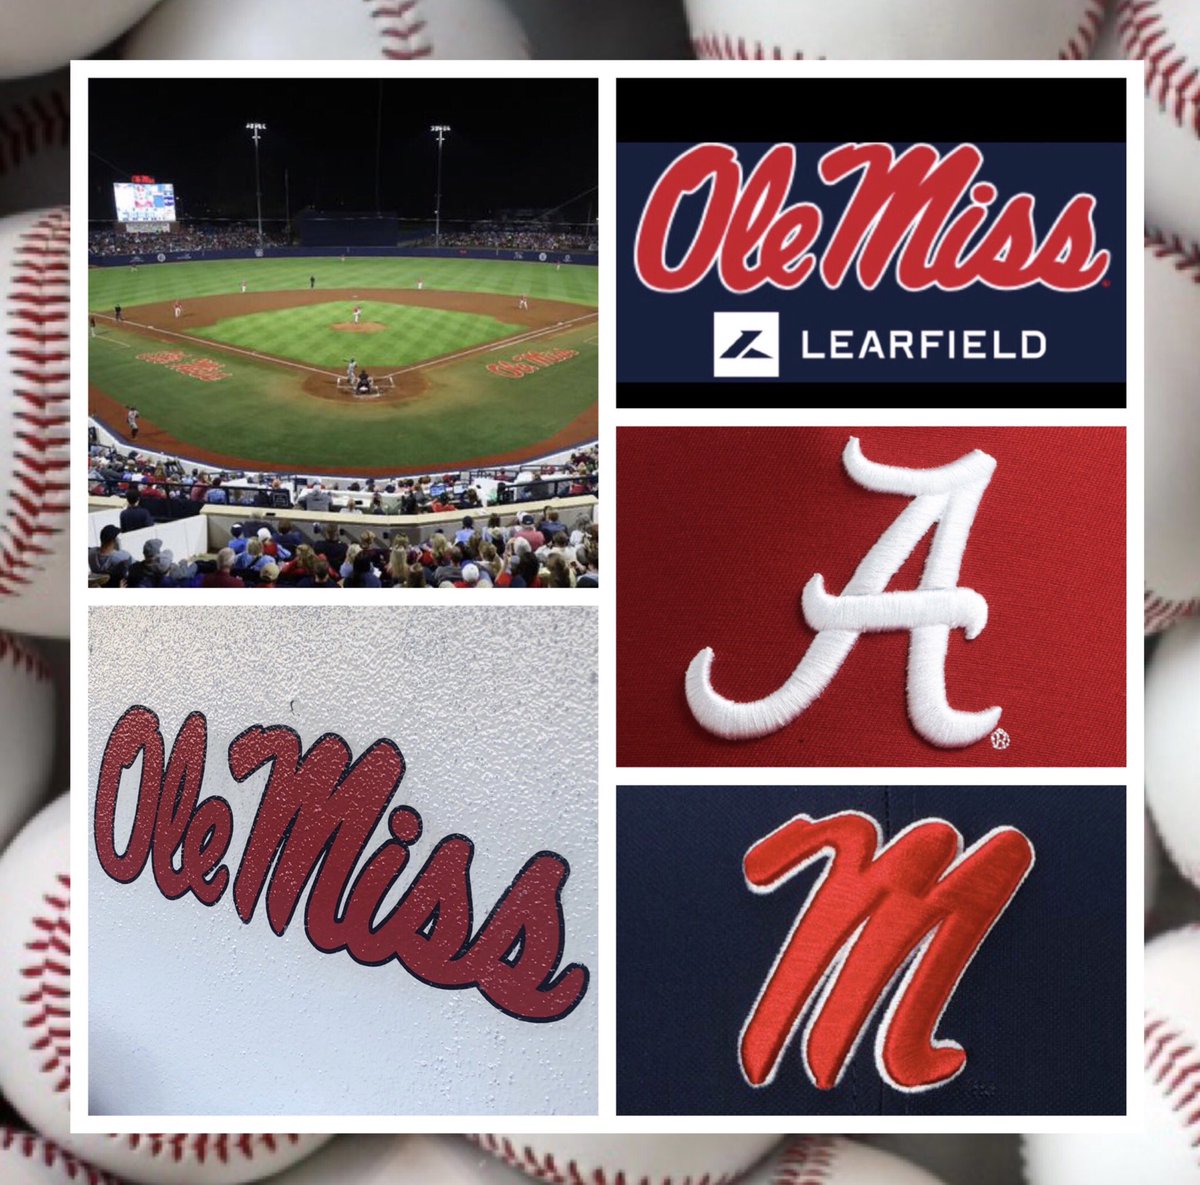 We’ve got @SEC Thursday night baseball in Oxford as @OleMissBSB hosts Alabama at 6:30pm. Airtime 6pm w/@RebVoice & @HenduReb. Listen 🎧⬇️ 📻 Local station olemisssports.com/sports/2018/7/… 📱 @OleMissSports app 💻 online olemisssports.com/watch?Live=988…